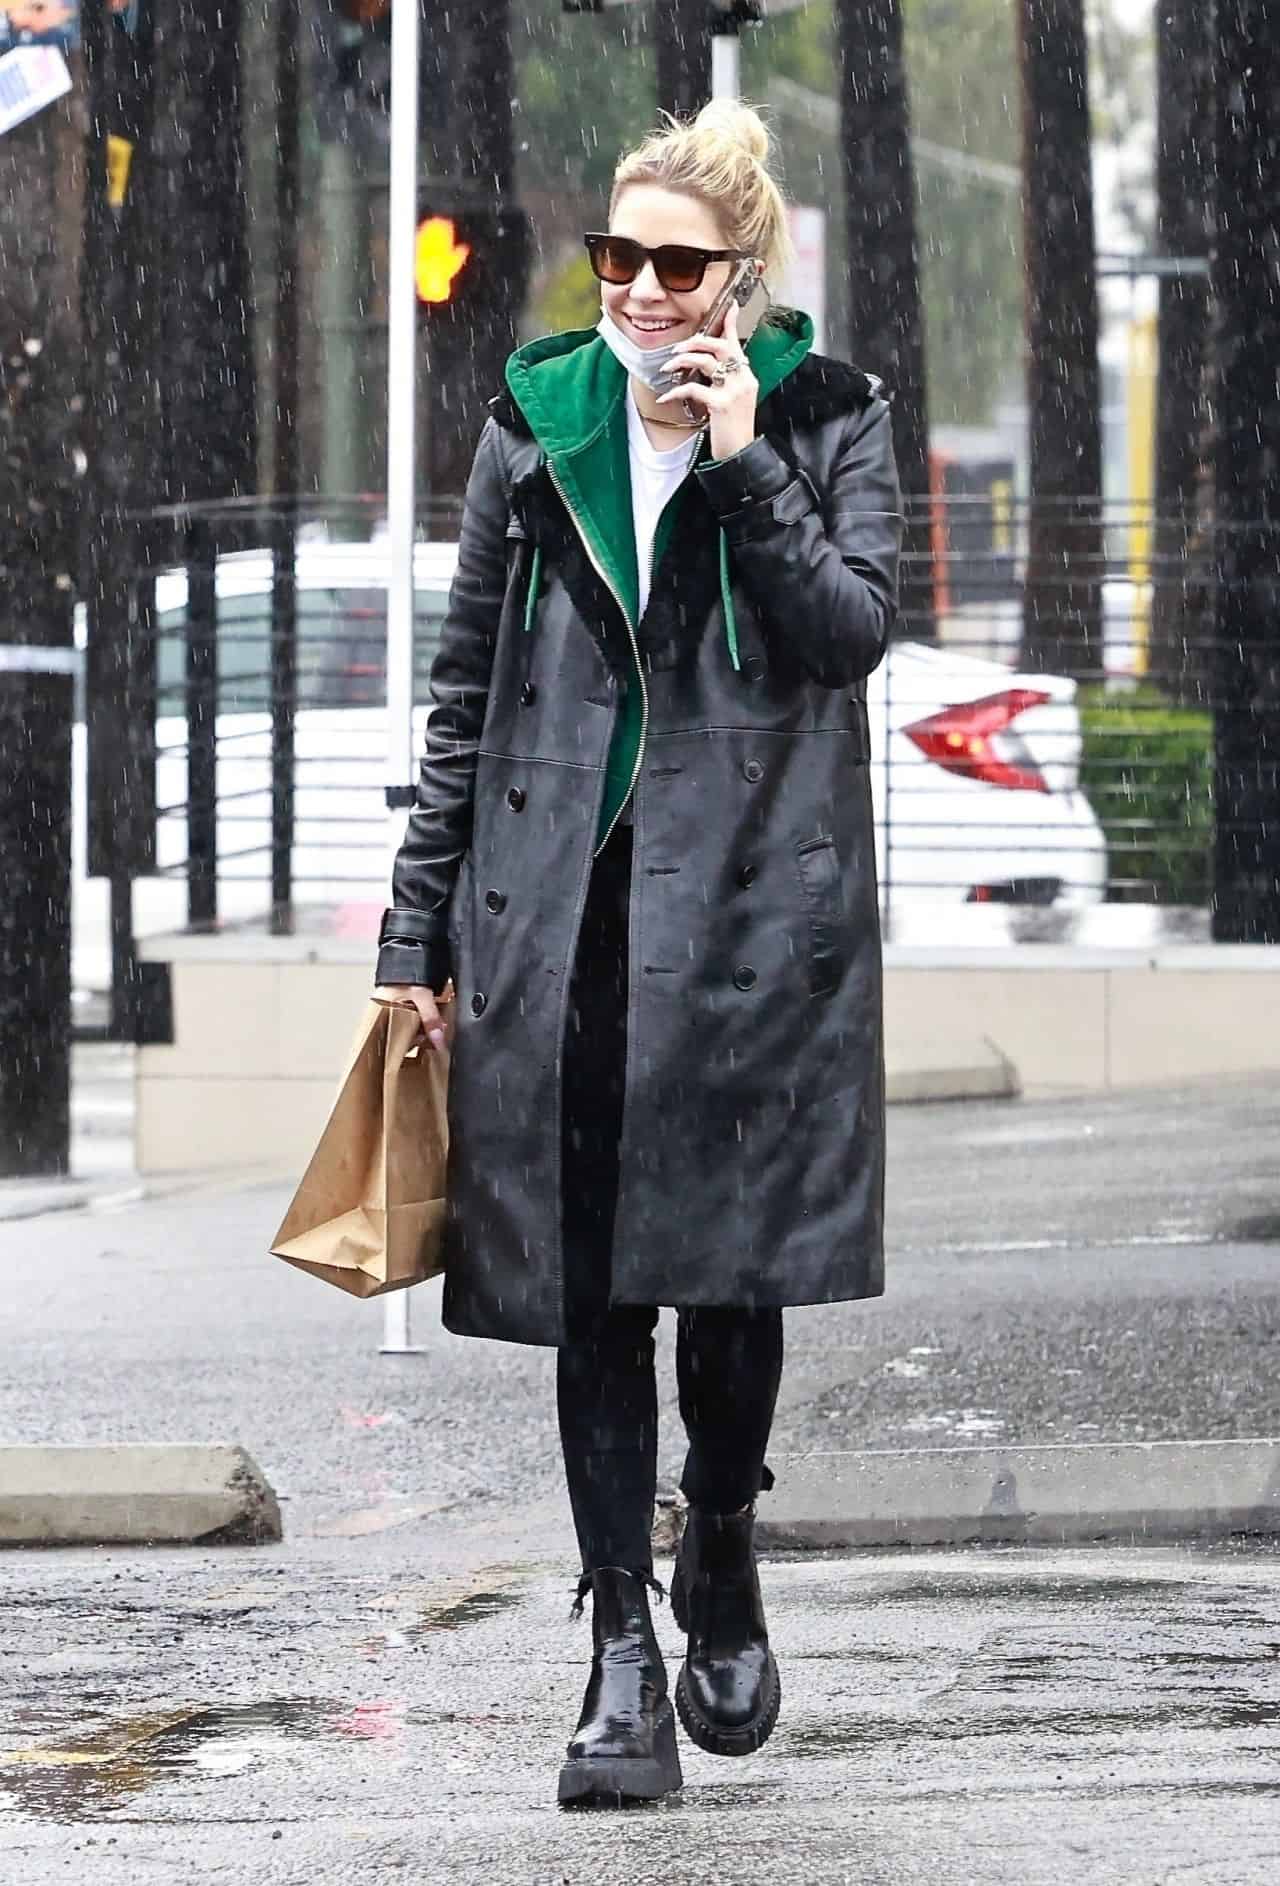 Ashley Benson Looked Chic in a Leather Coat During the Stormy Weather in LA